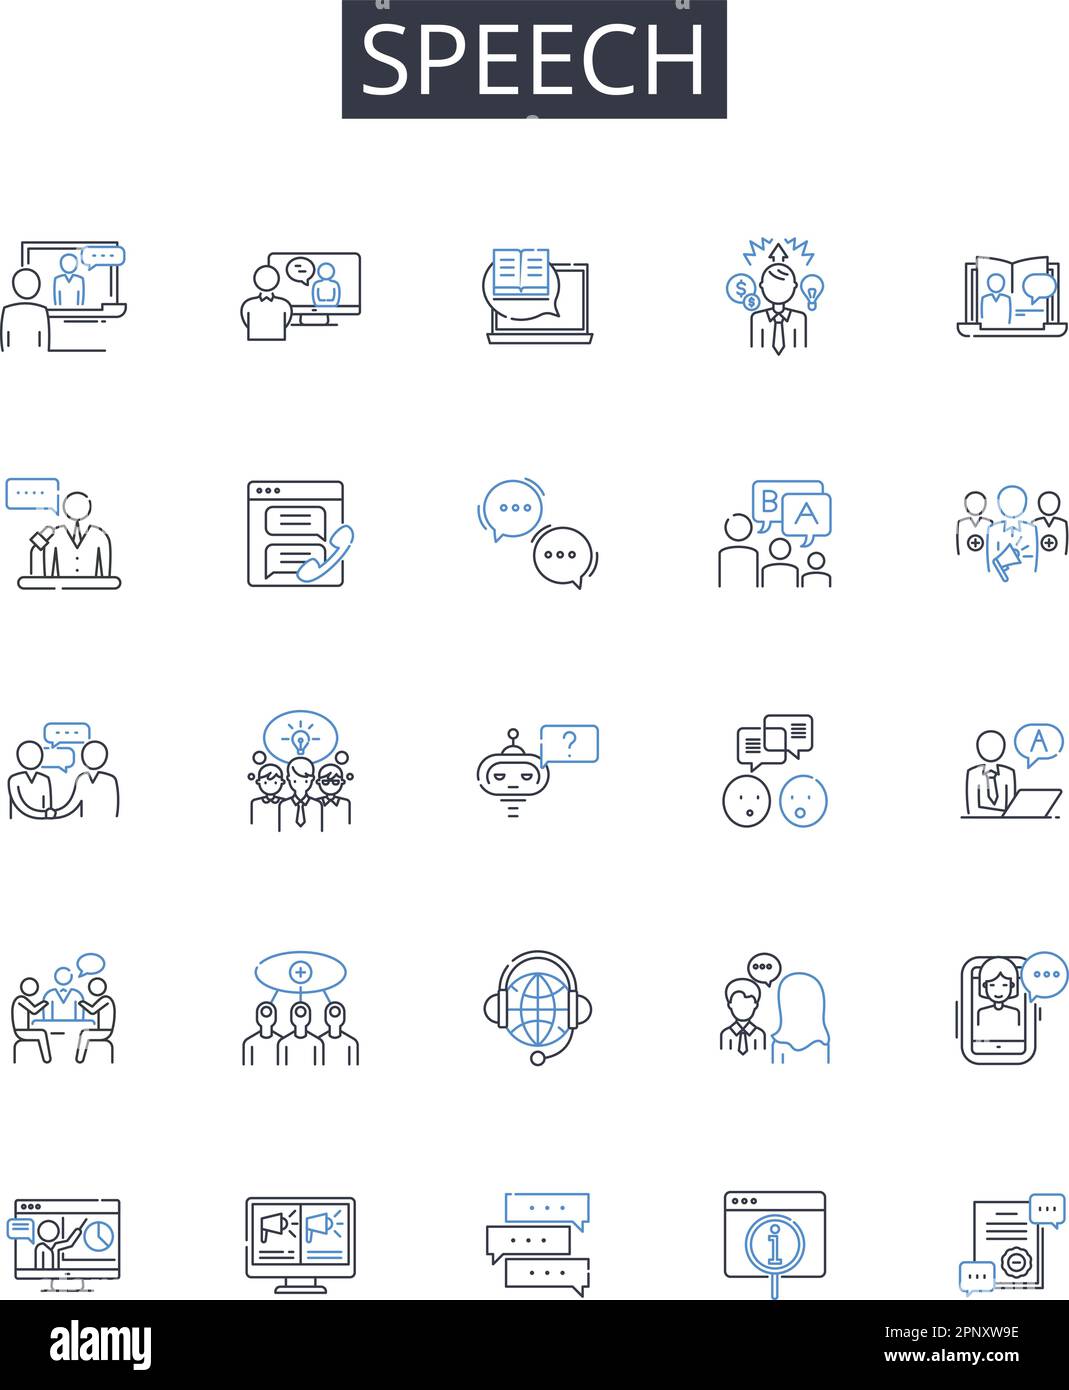 Speech line icons collection. Delivery, Oratory, Discourse, Verbalization, Dialogue, Expression, Conversation vector and linear illustration Stock Vector